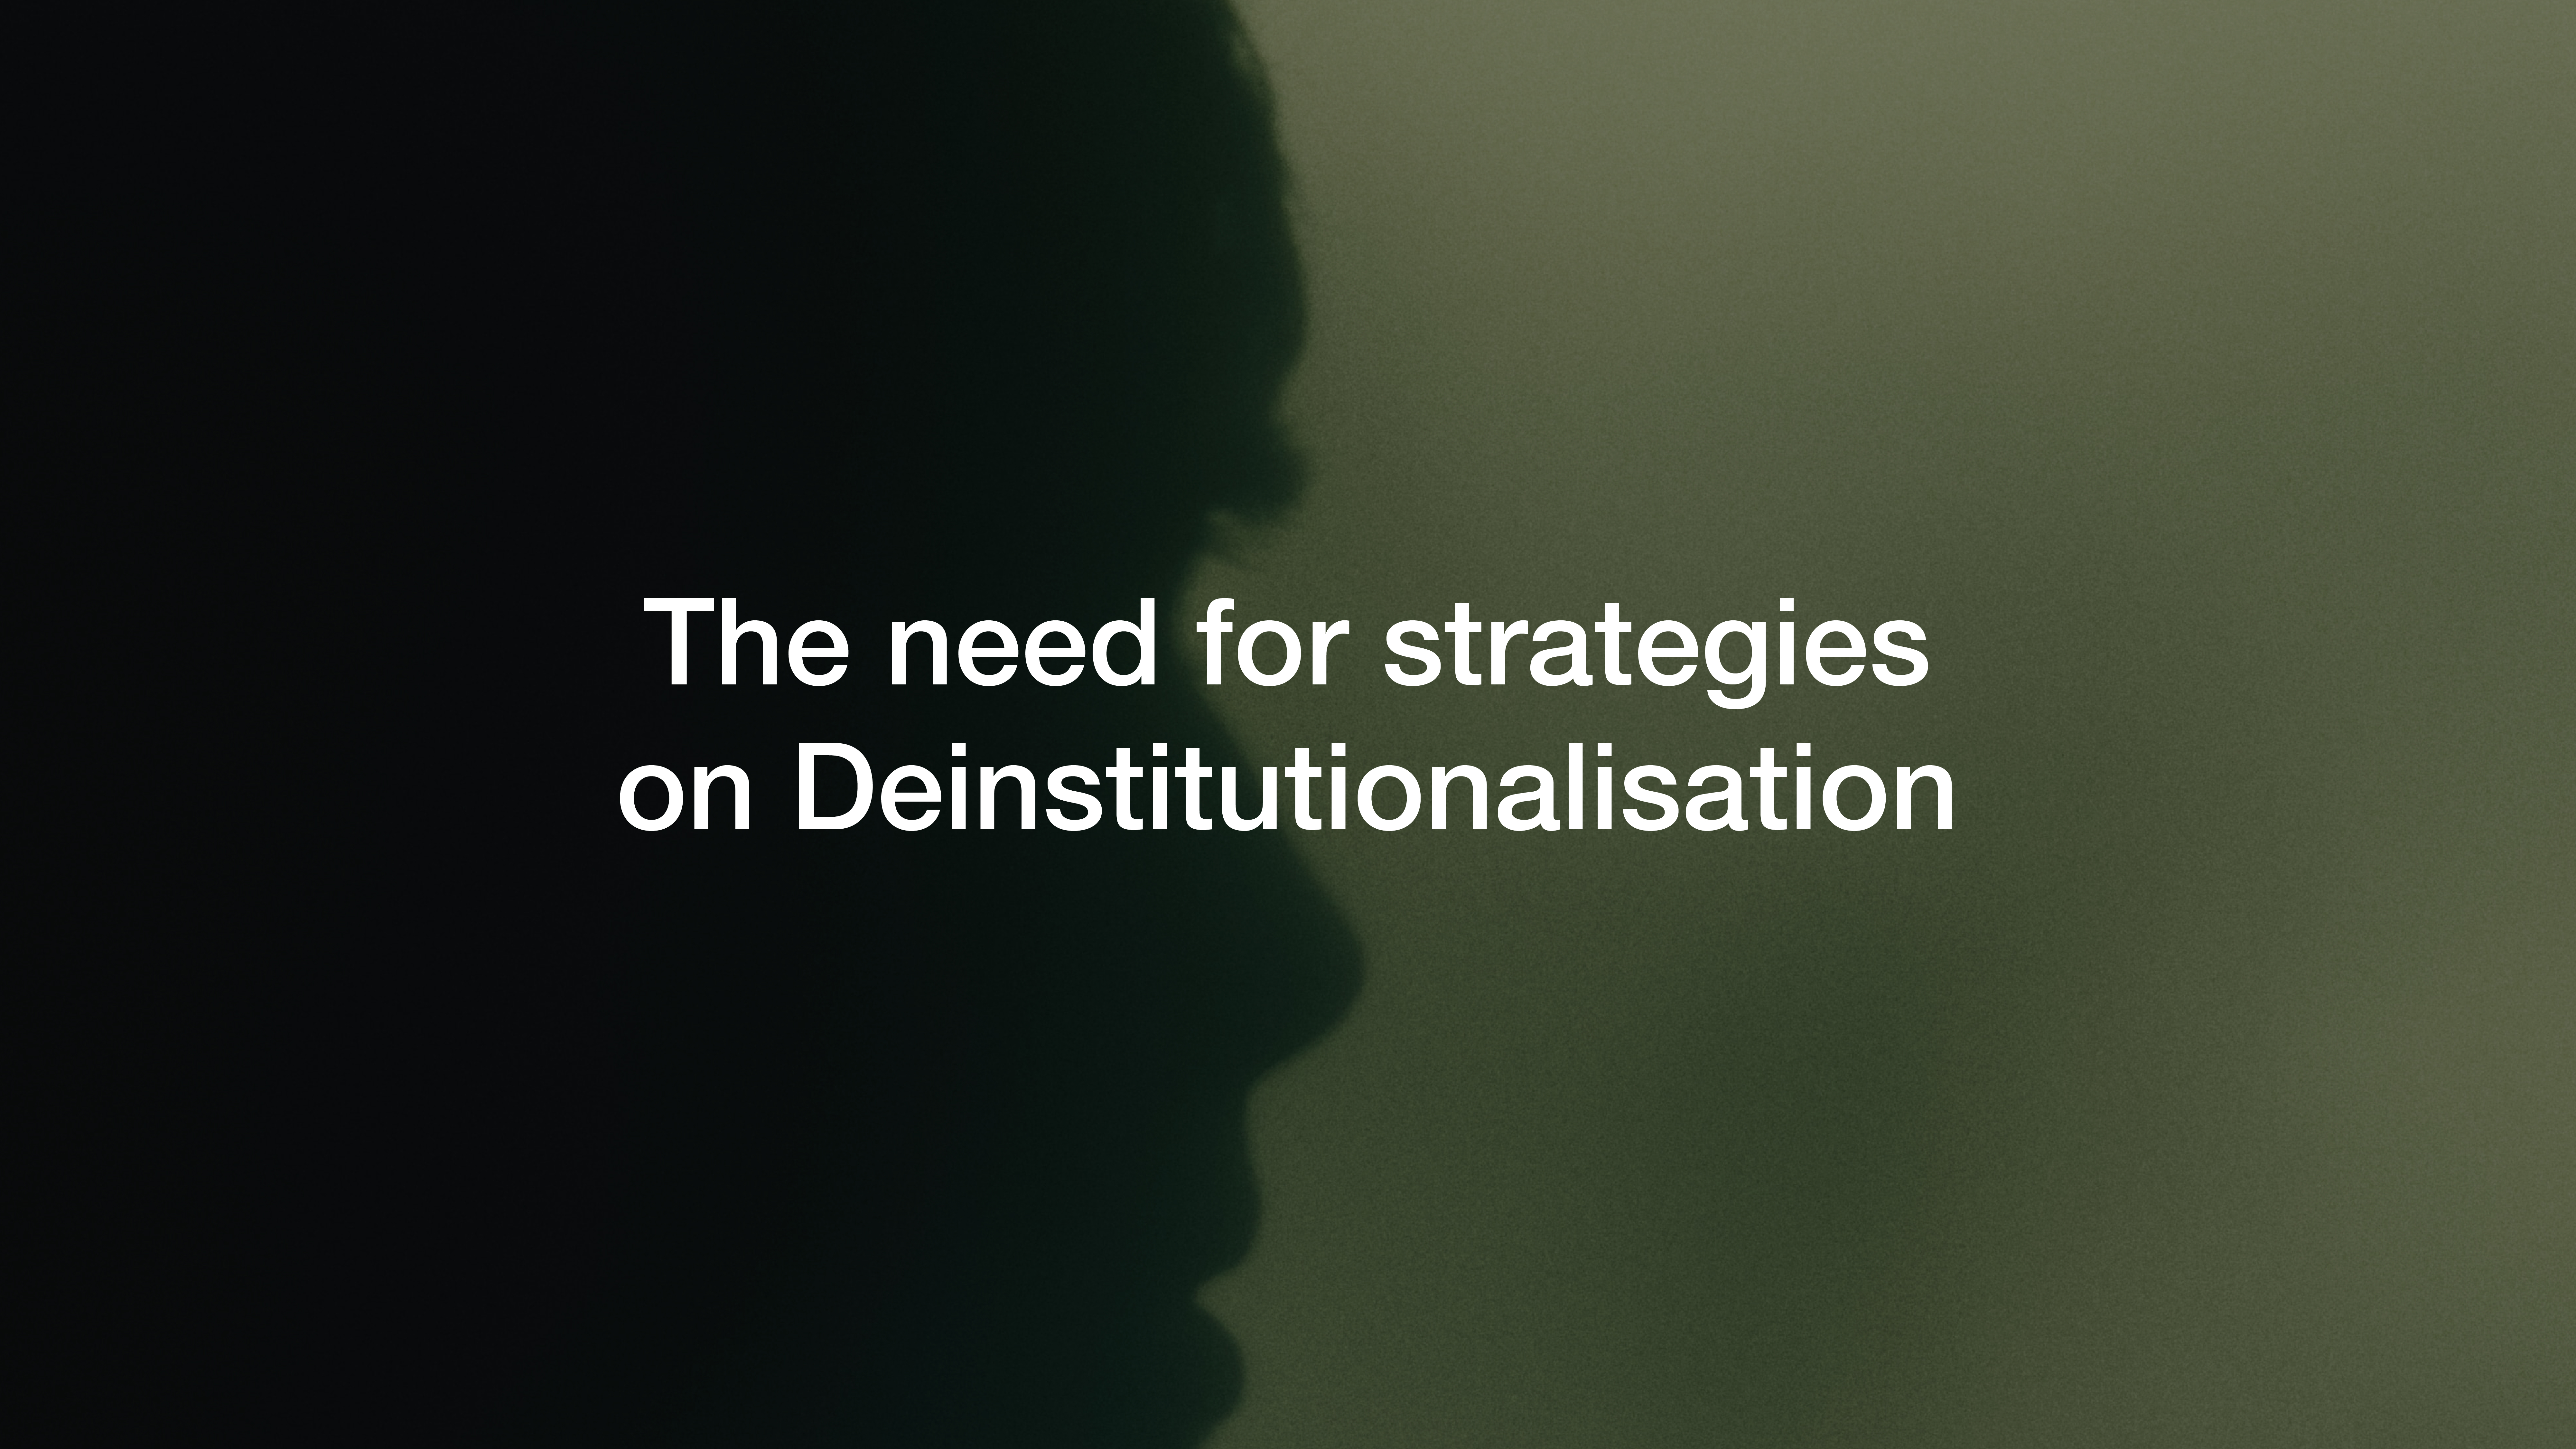 The need for strategies on Deinstitutionalisation